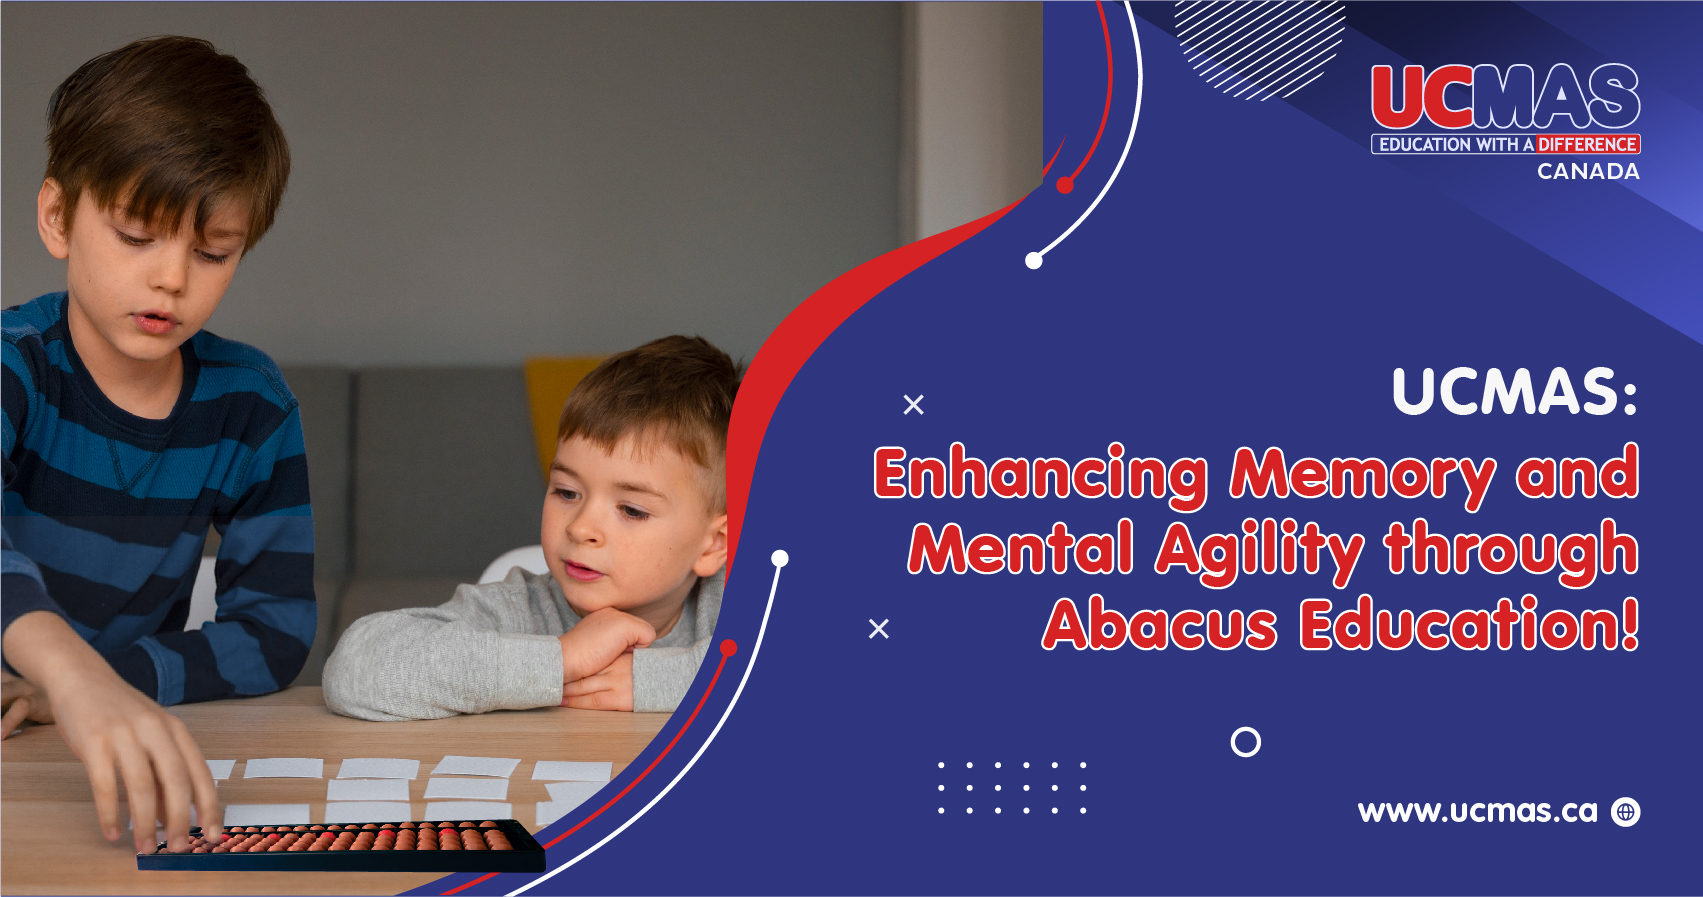 Role of Abacus Education in Improving Memory and Mental Agility